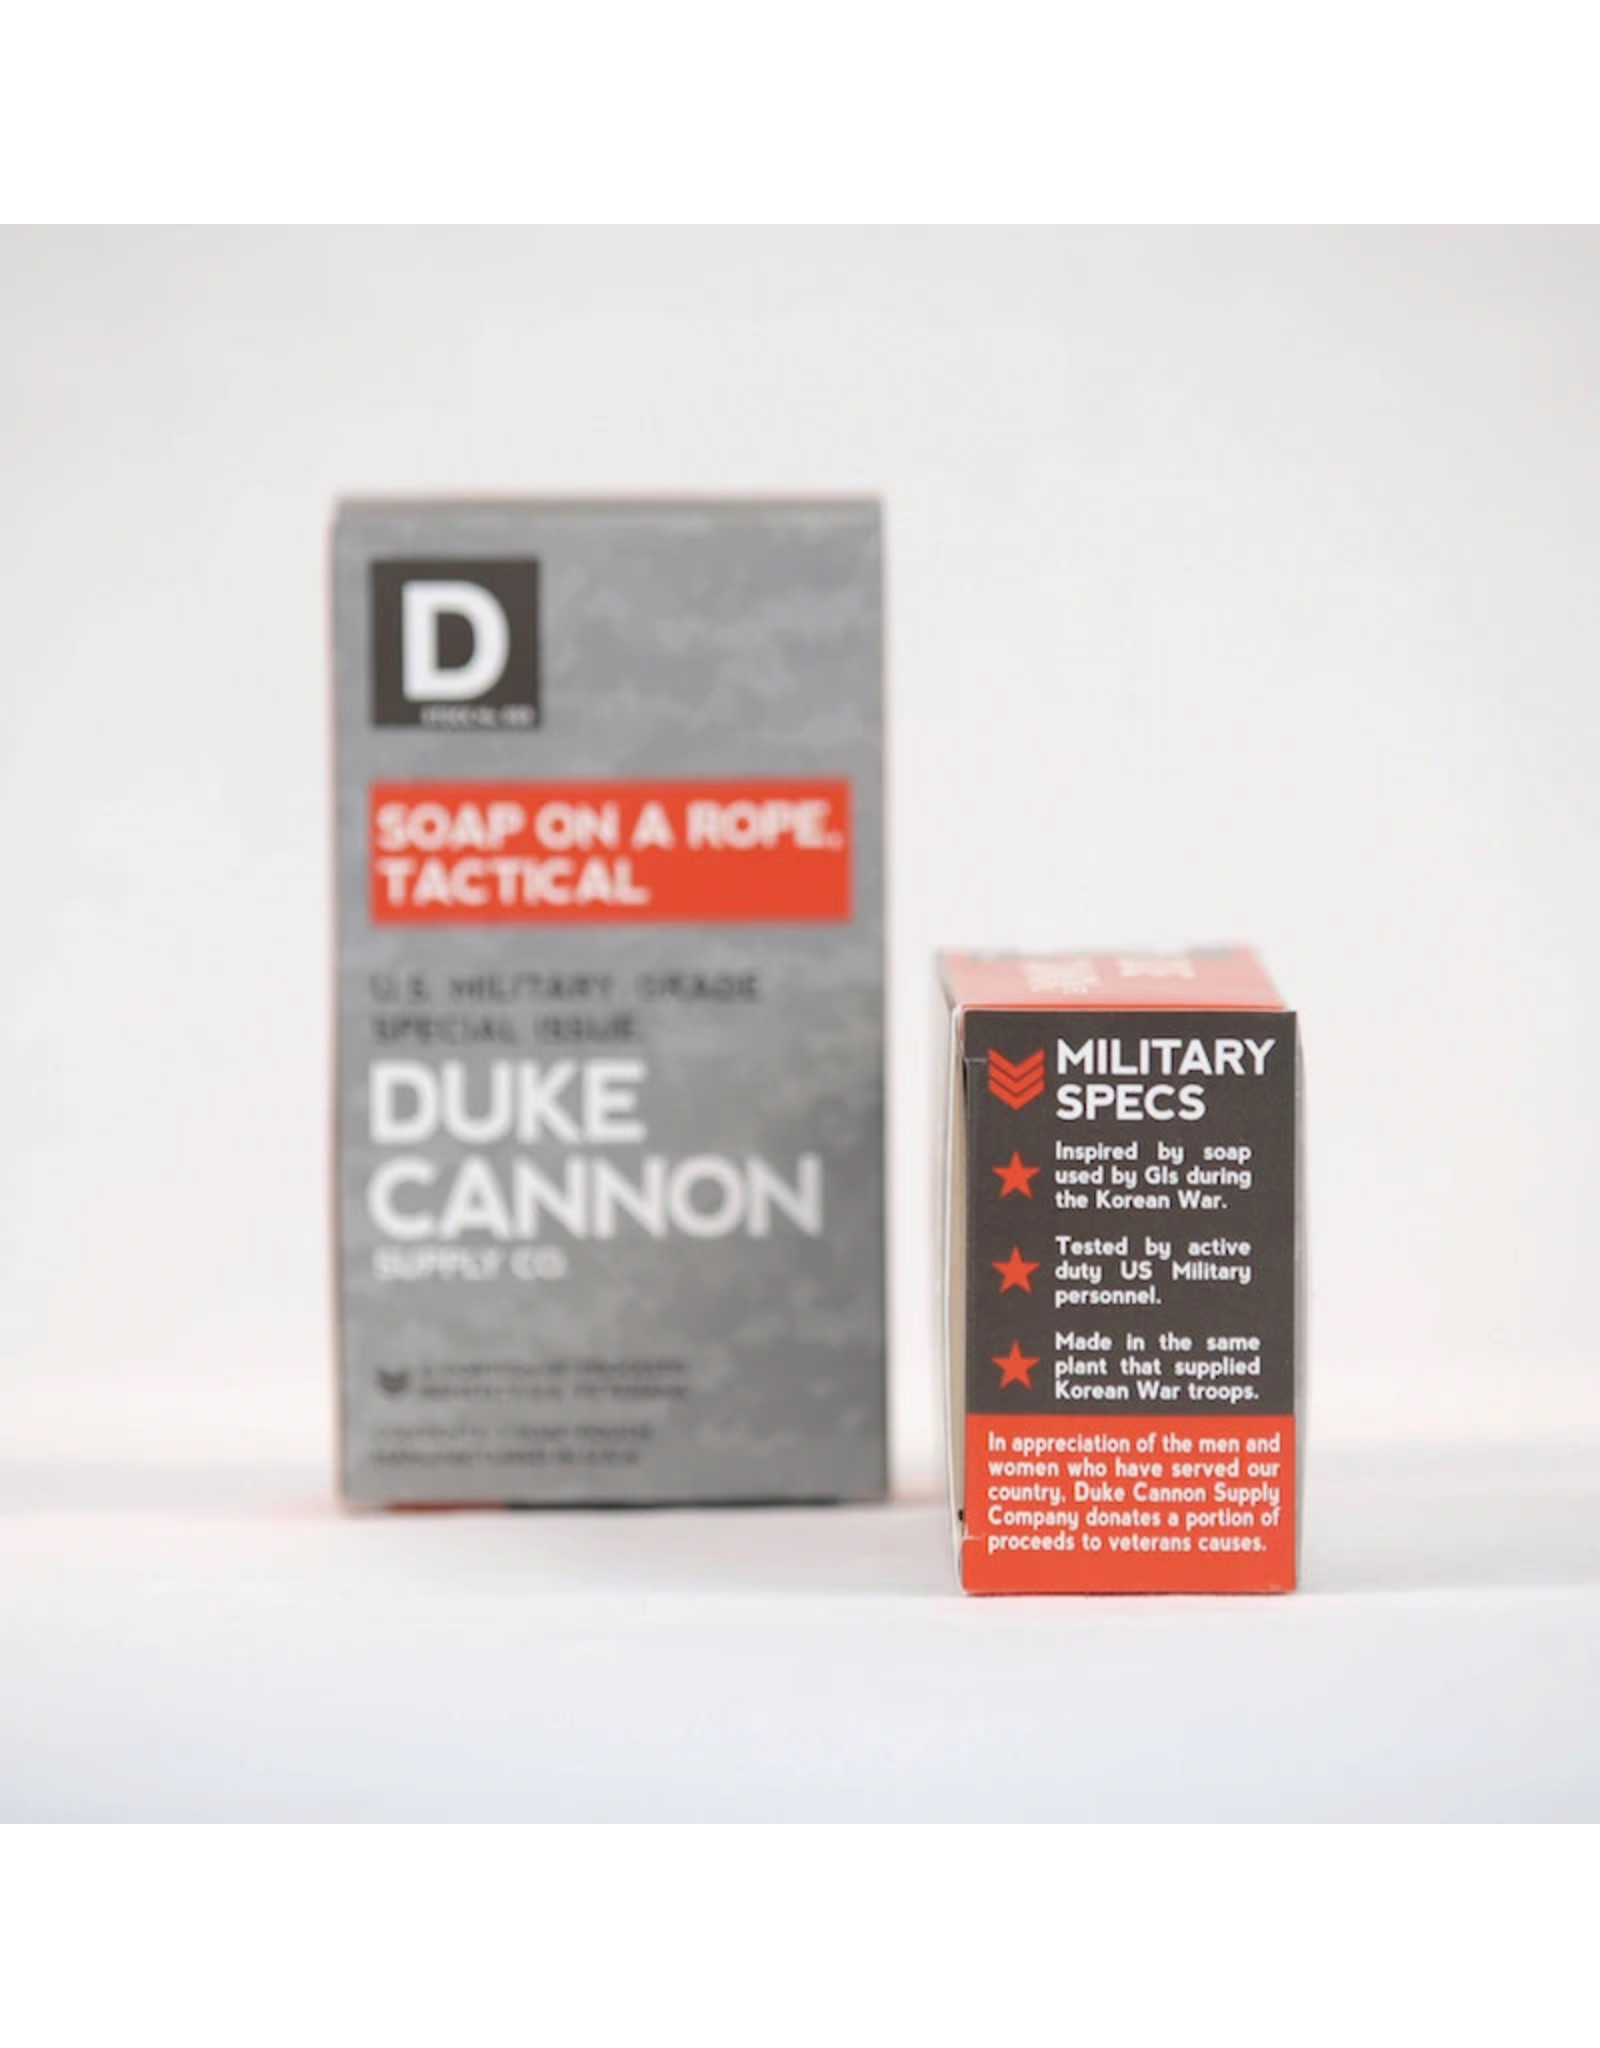 Duke Cannon Supply Co. Soap on a Rope, Tactical